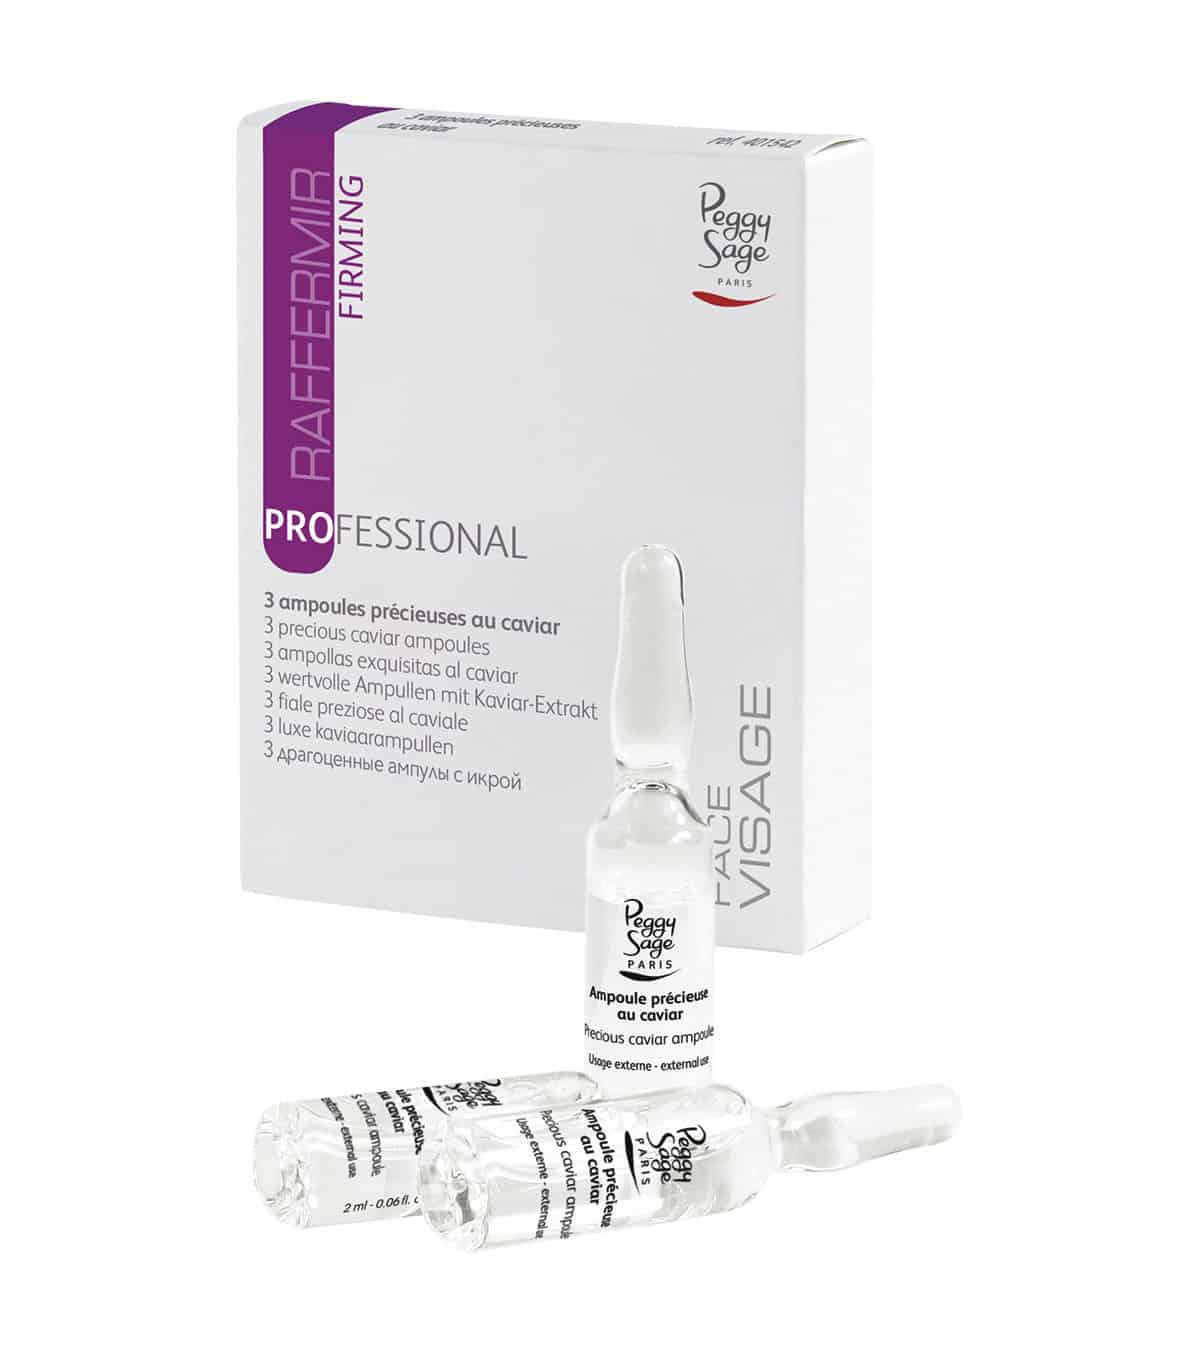 Peggy sage 3 ampoules with caviar 3x2ml